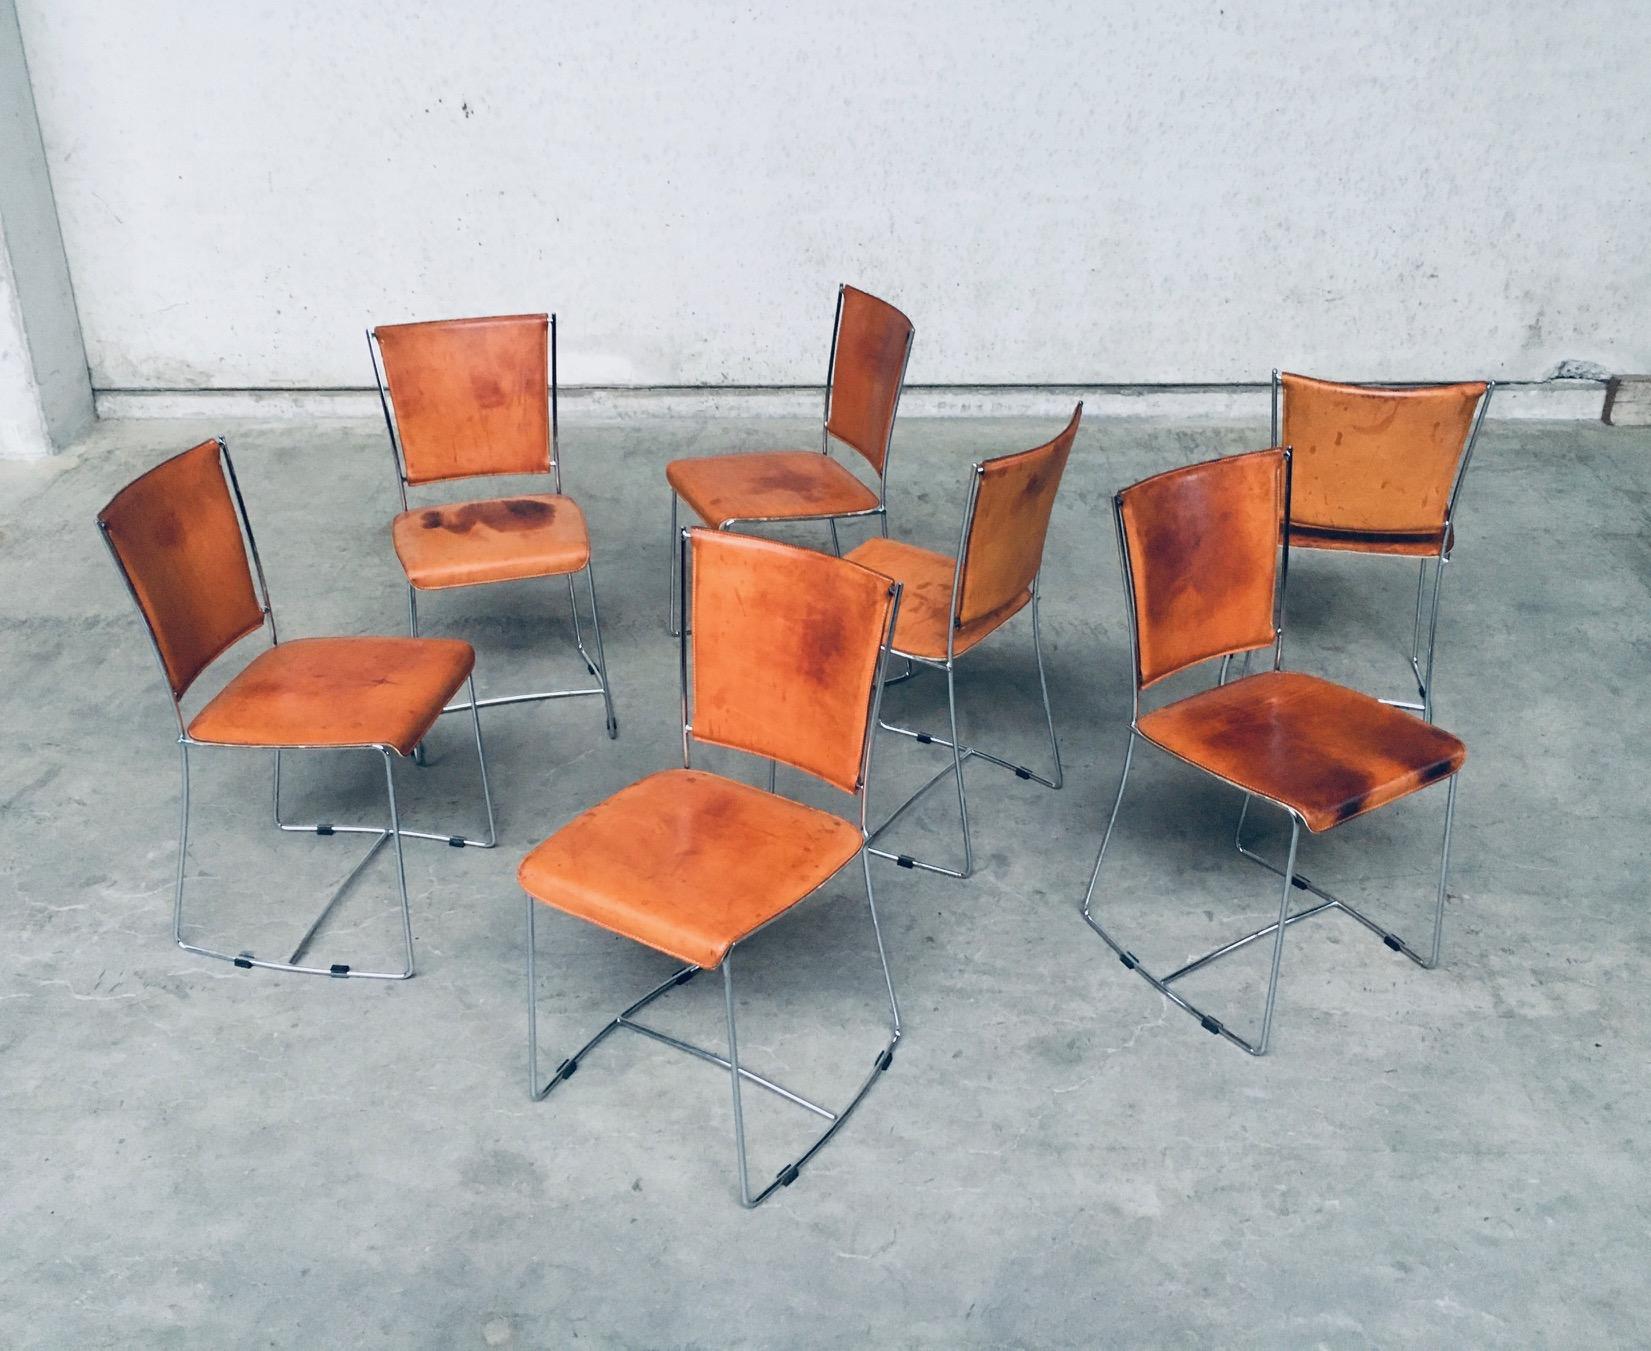 Metal Postmodern Italian Design Leather Dining Chair Set by Segis, Italy, 1990's For Sale